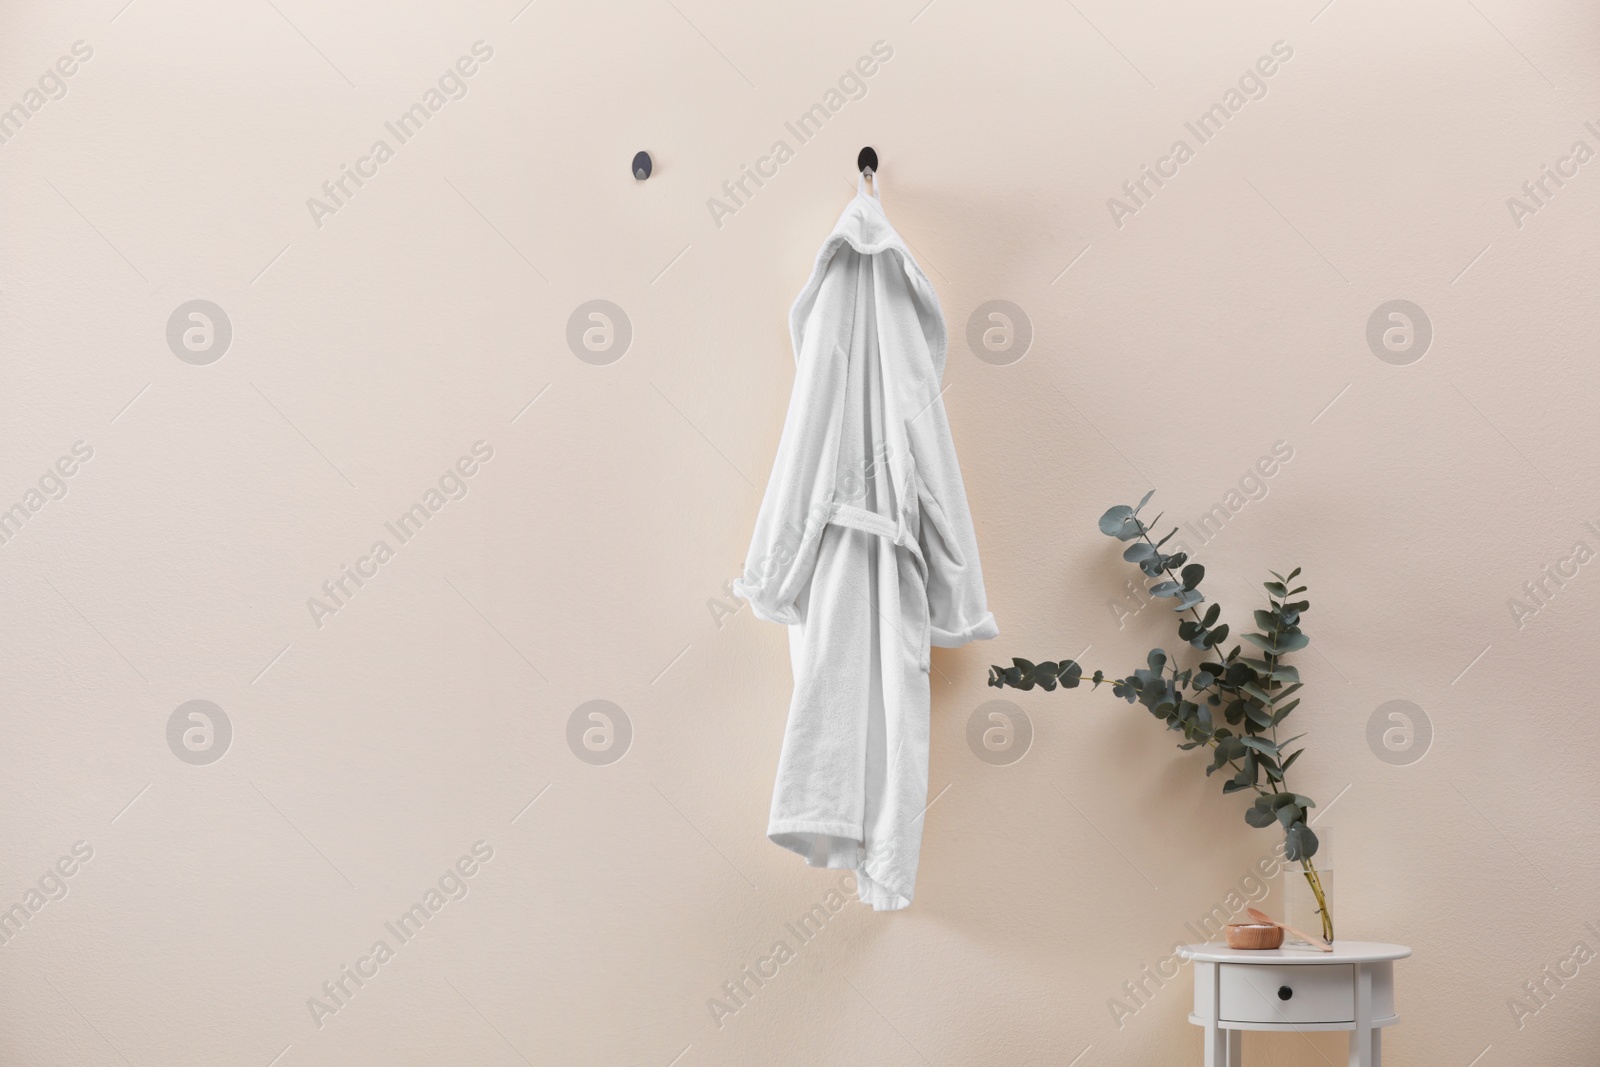 Photo of Soft comfortable bathrobe hanging on beige wall indoors, space for text